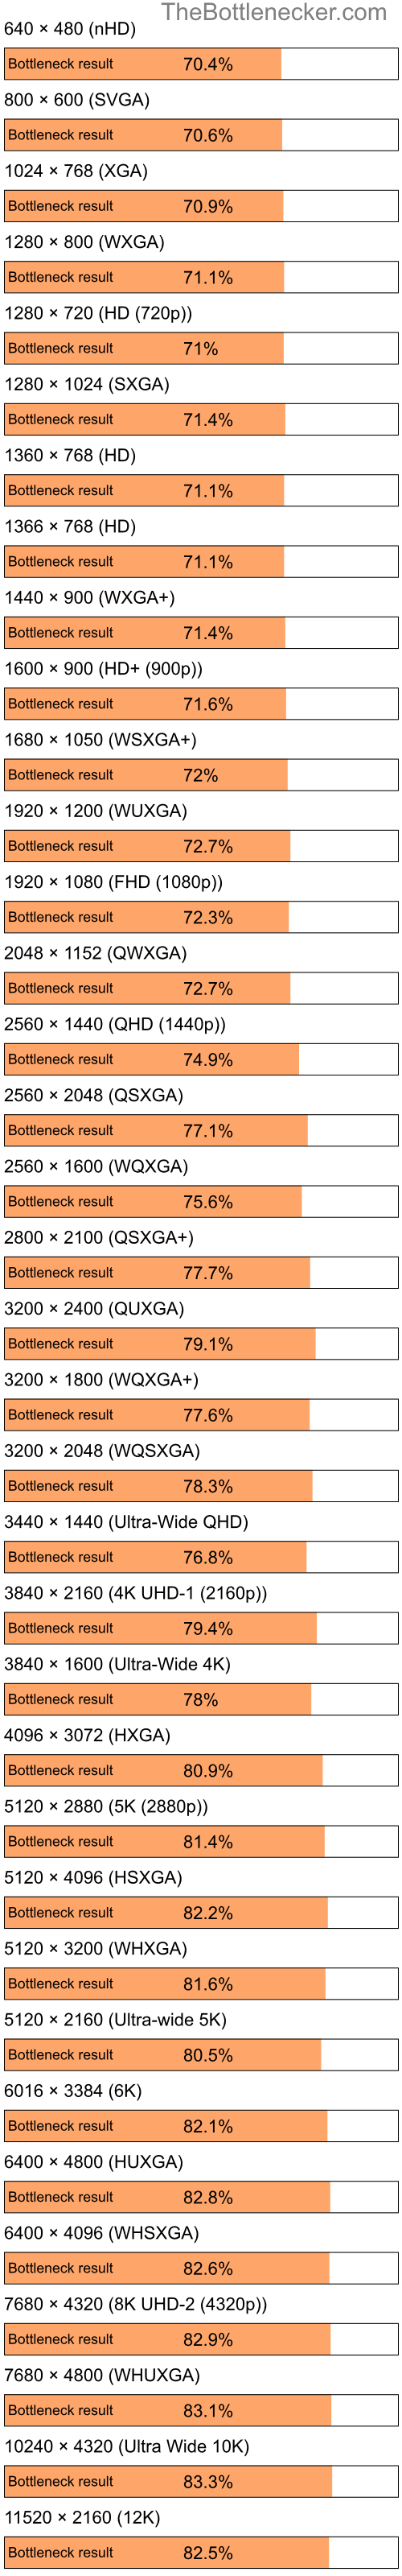 Bottleneck results by resolution for Intel Celeron M 410 and NVIDIA Quadro NVS 295 in Graphic Card Intense Tasks